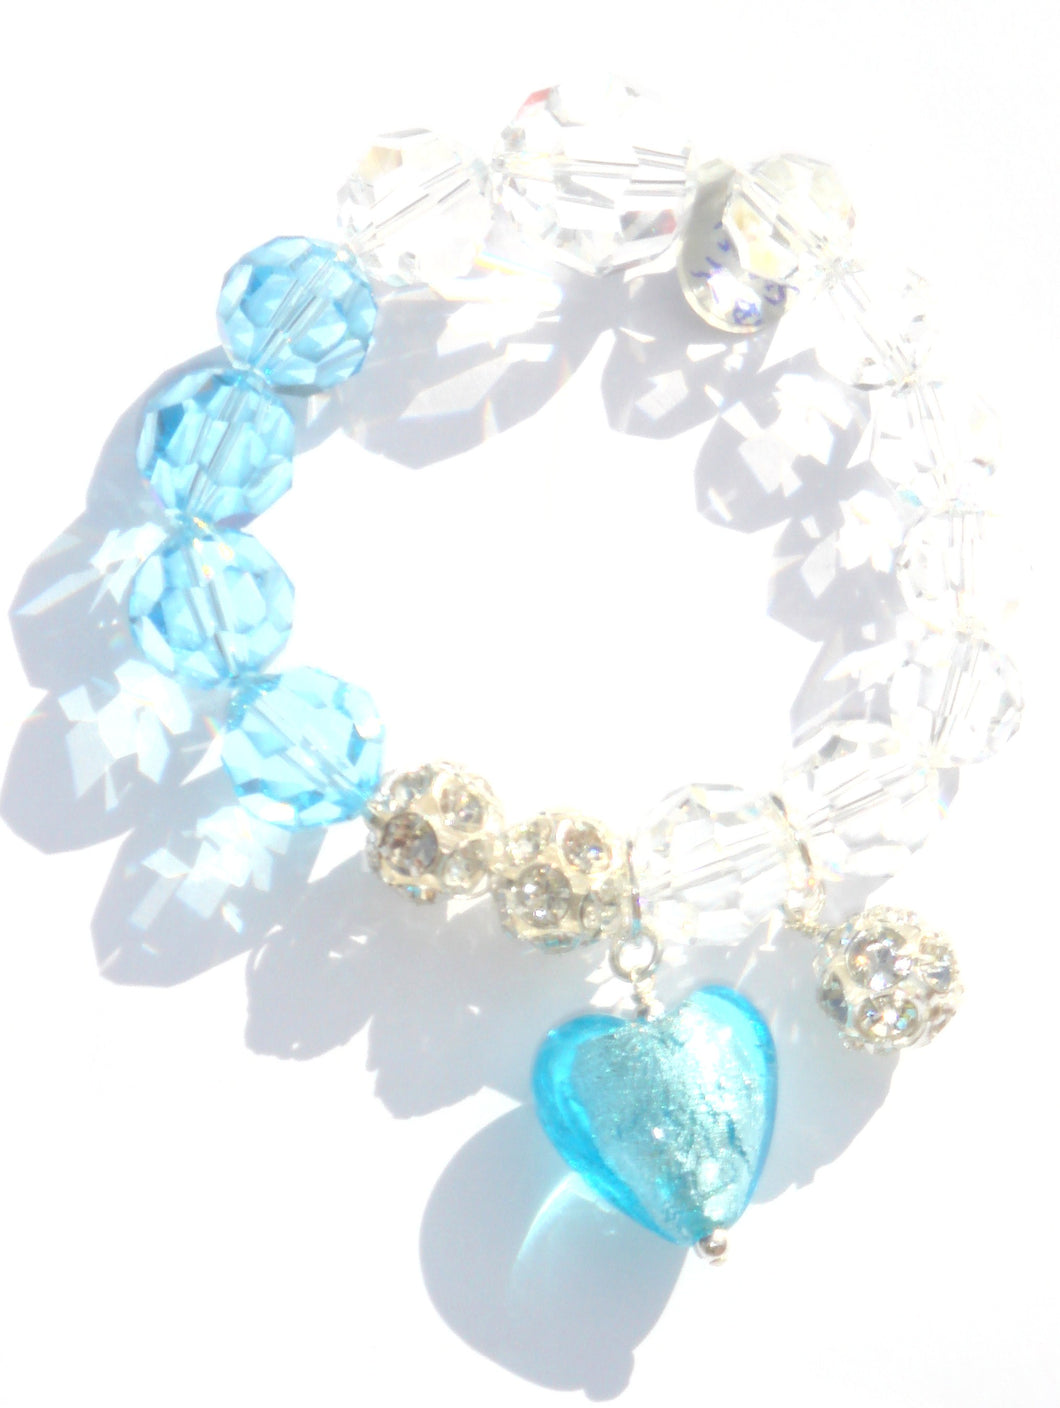 Flora Swarovski® Faceted Aquamarine and Clear Crystal Bracelet with Heart and Crystal Ball Drops